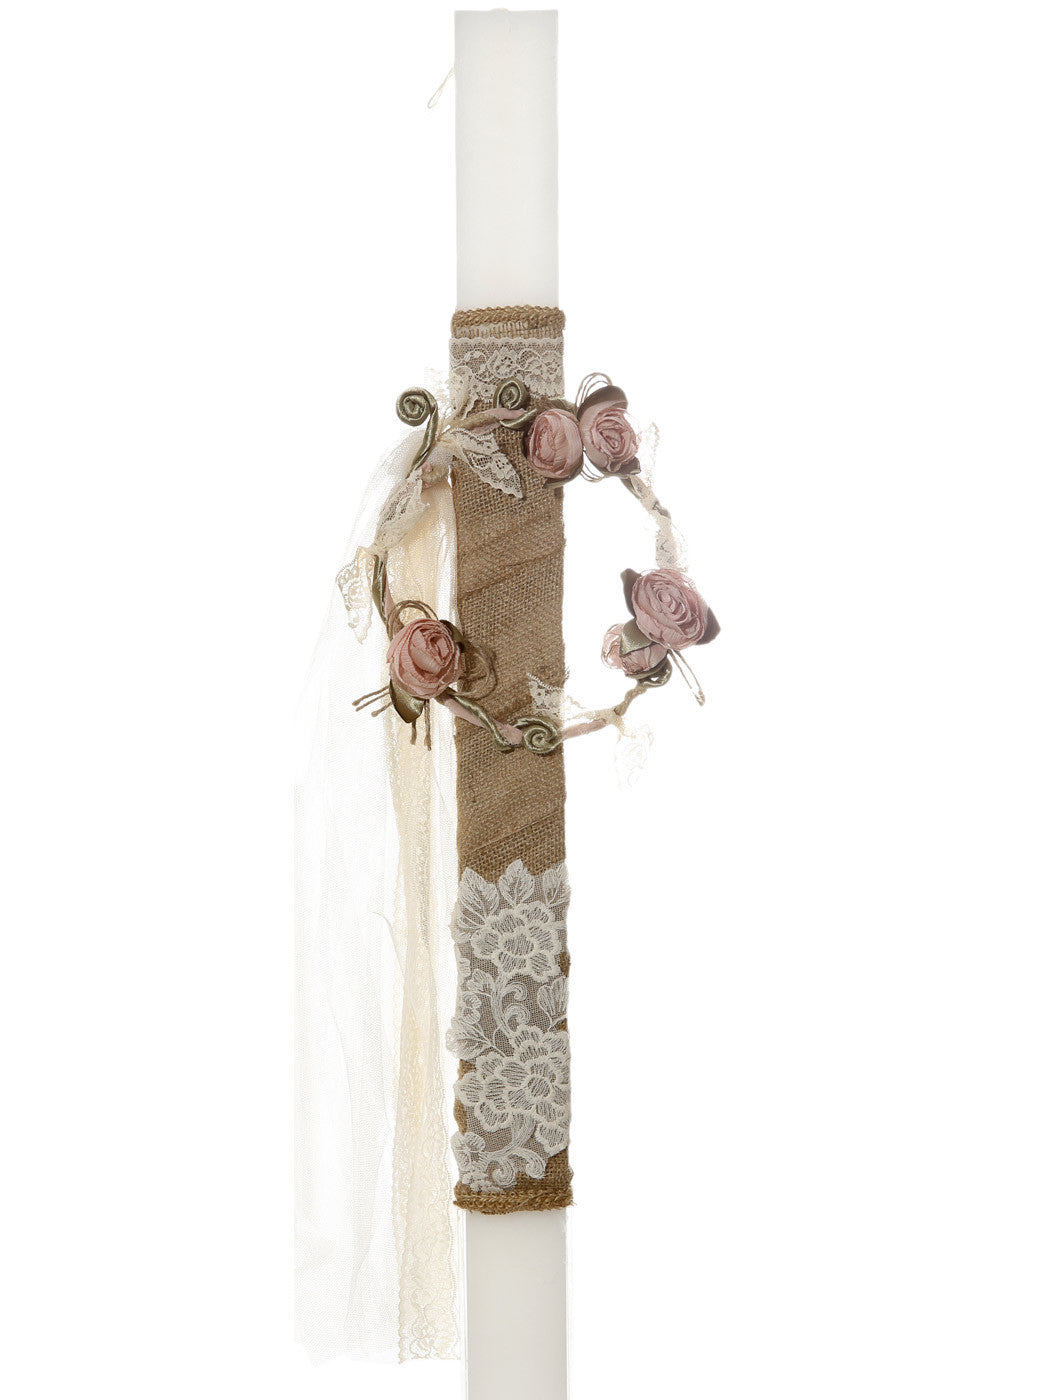 Baptism candle with wreath of flowers-Salvatora